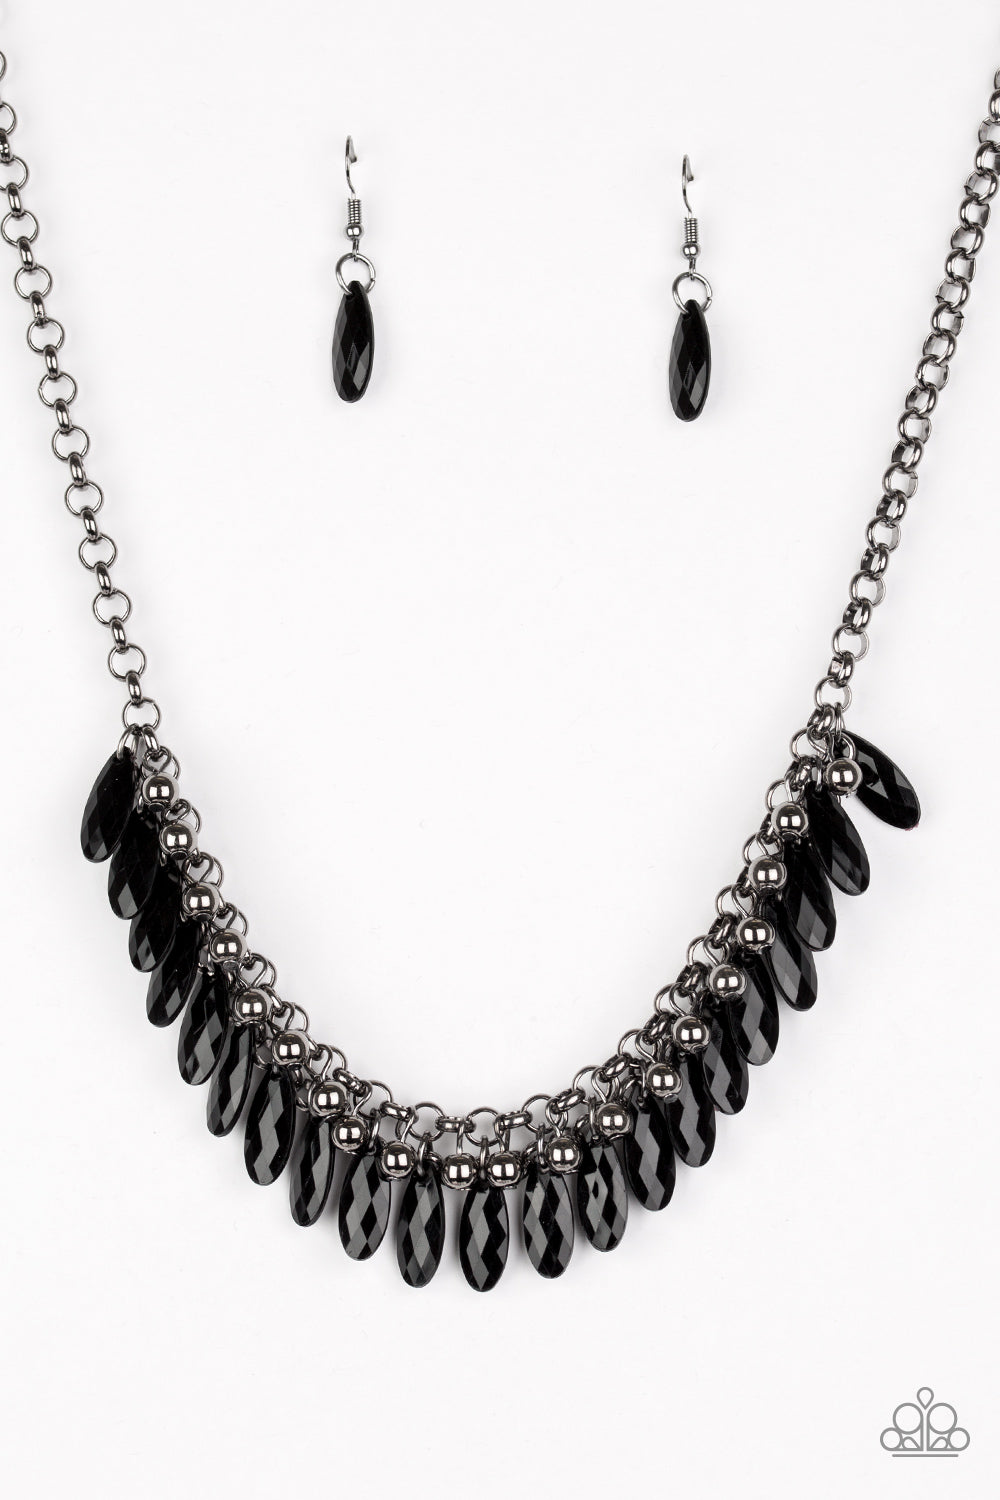 five-dollar-jewelry-jersey-shore-black-necklace-paparazzi-accessories